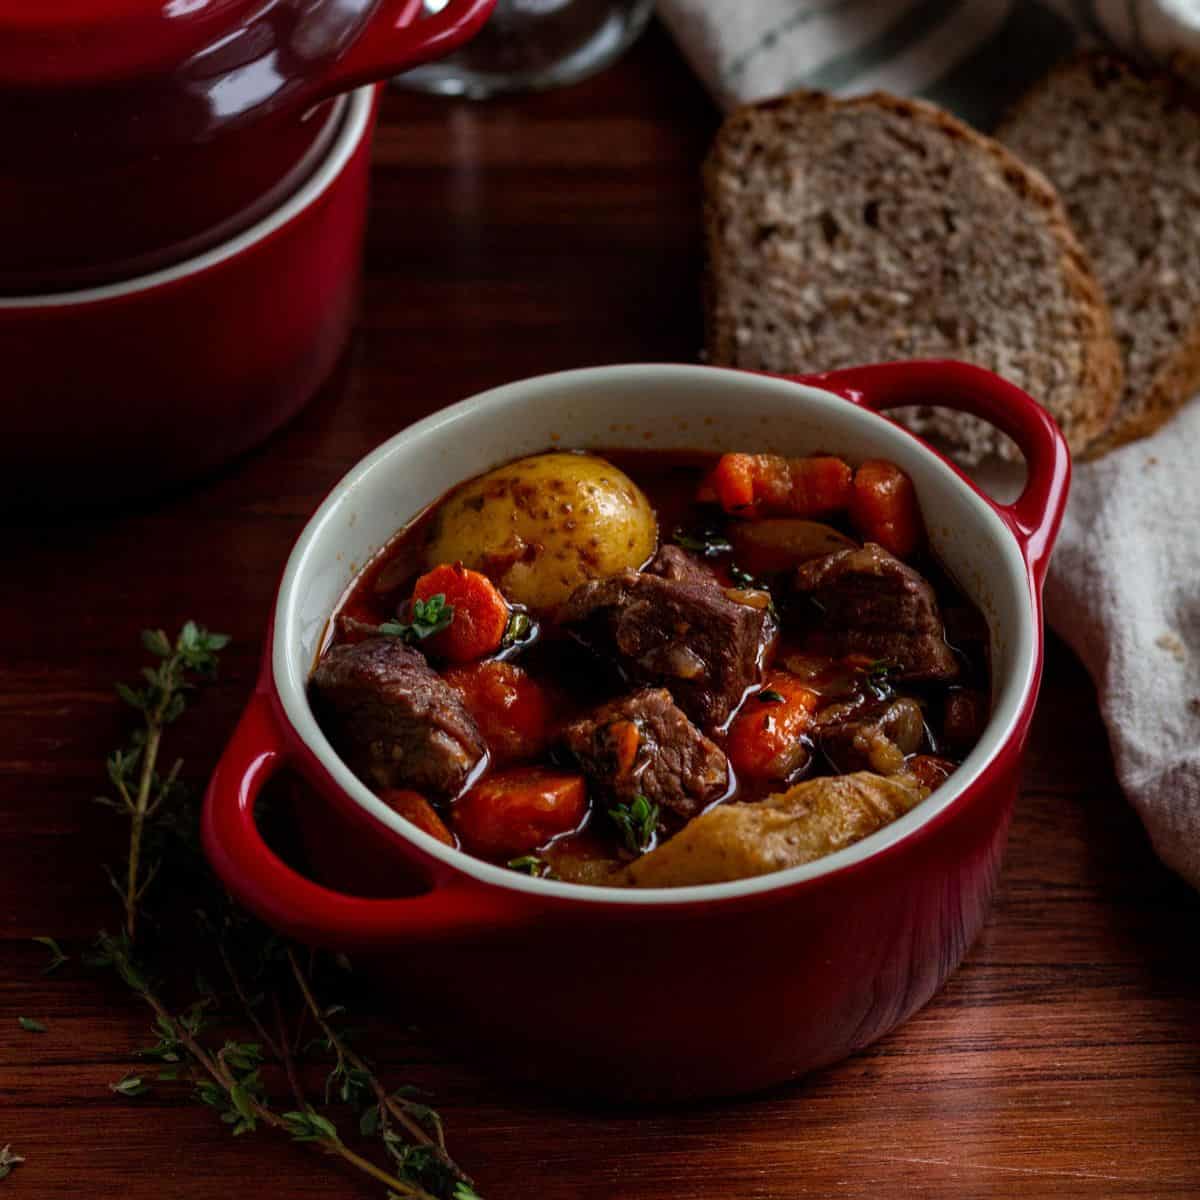 Red bowl of homemade beef stew. Bowl has handles. Fresh thyme and slices of bread surround the bowl.